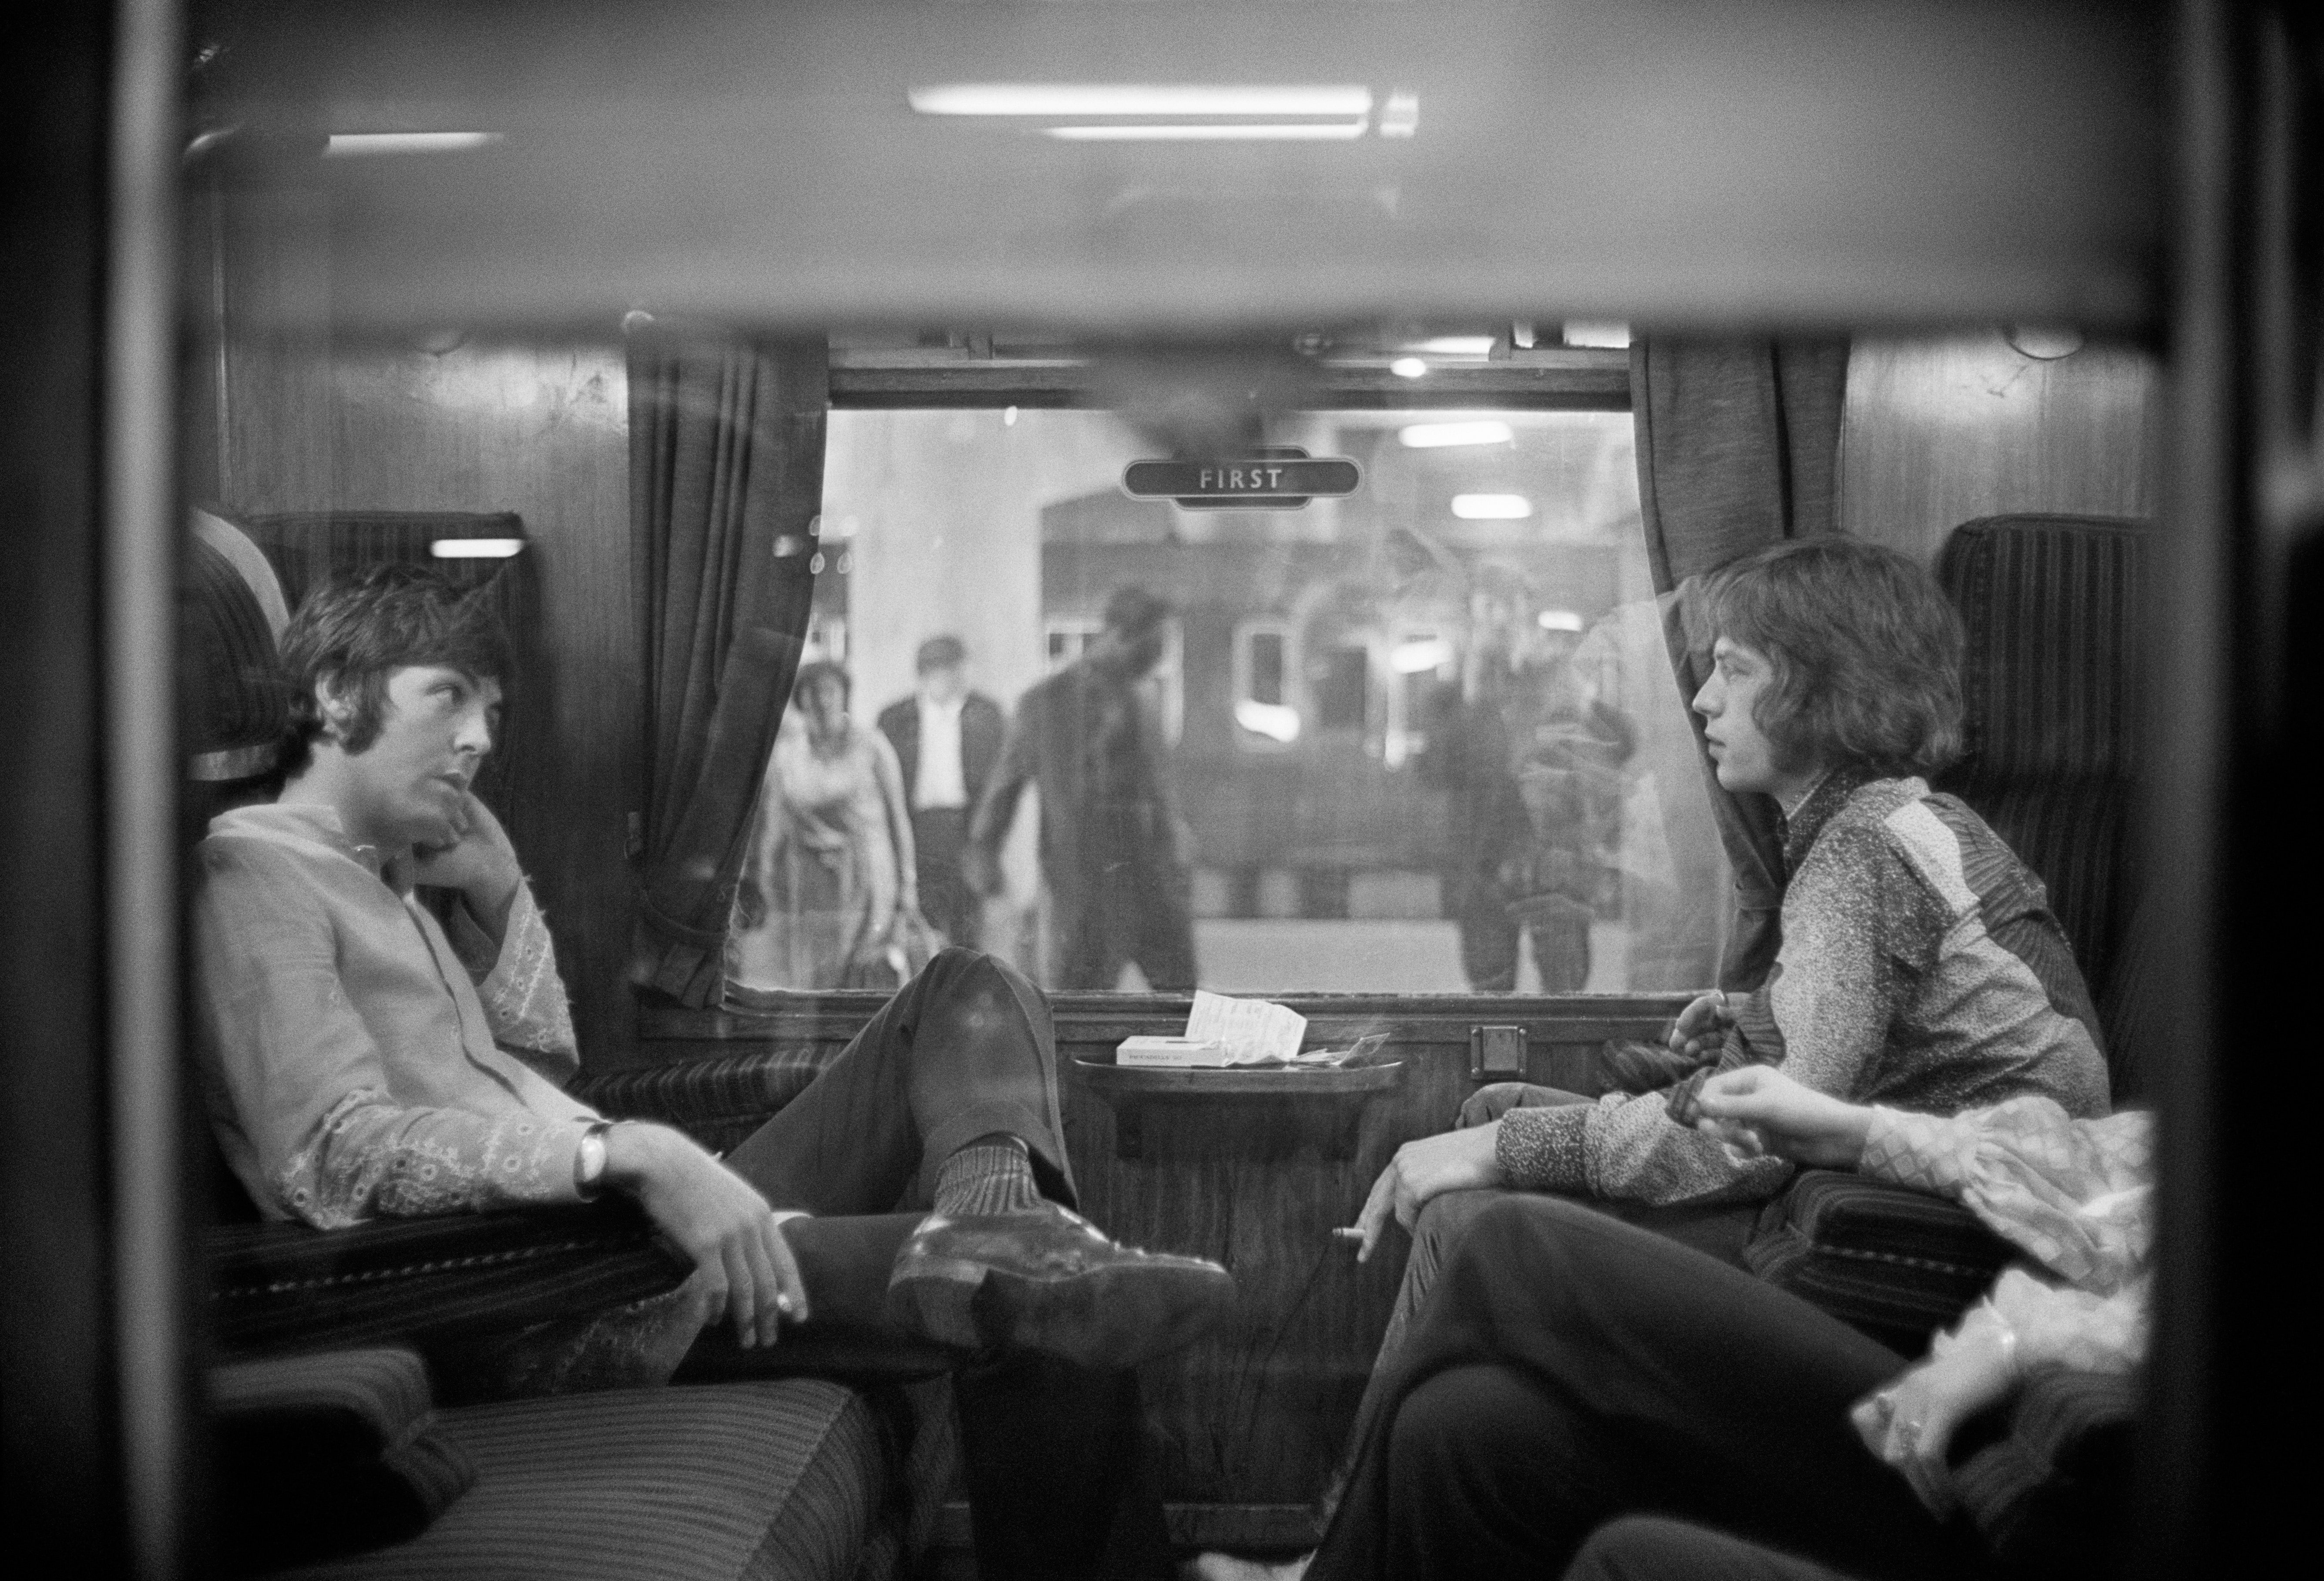 Paul McCartney of The Beatles and Mick Jagger of The Rolling Stones sit opposite each other on a train at Euston Station in 1967